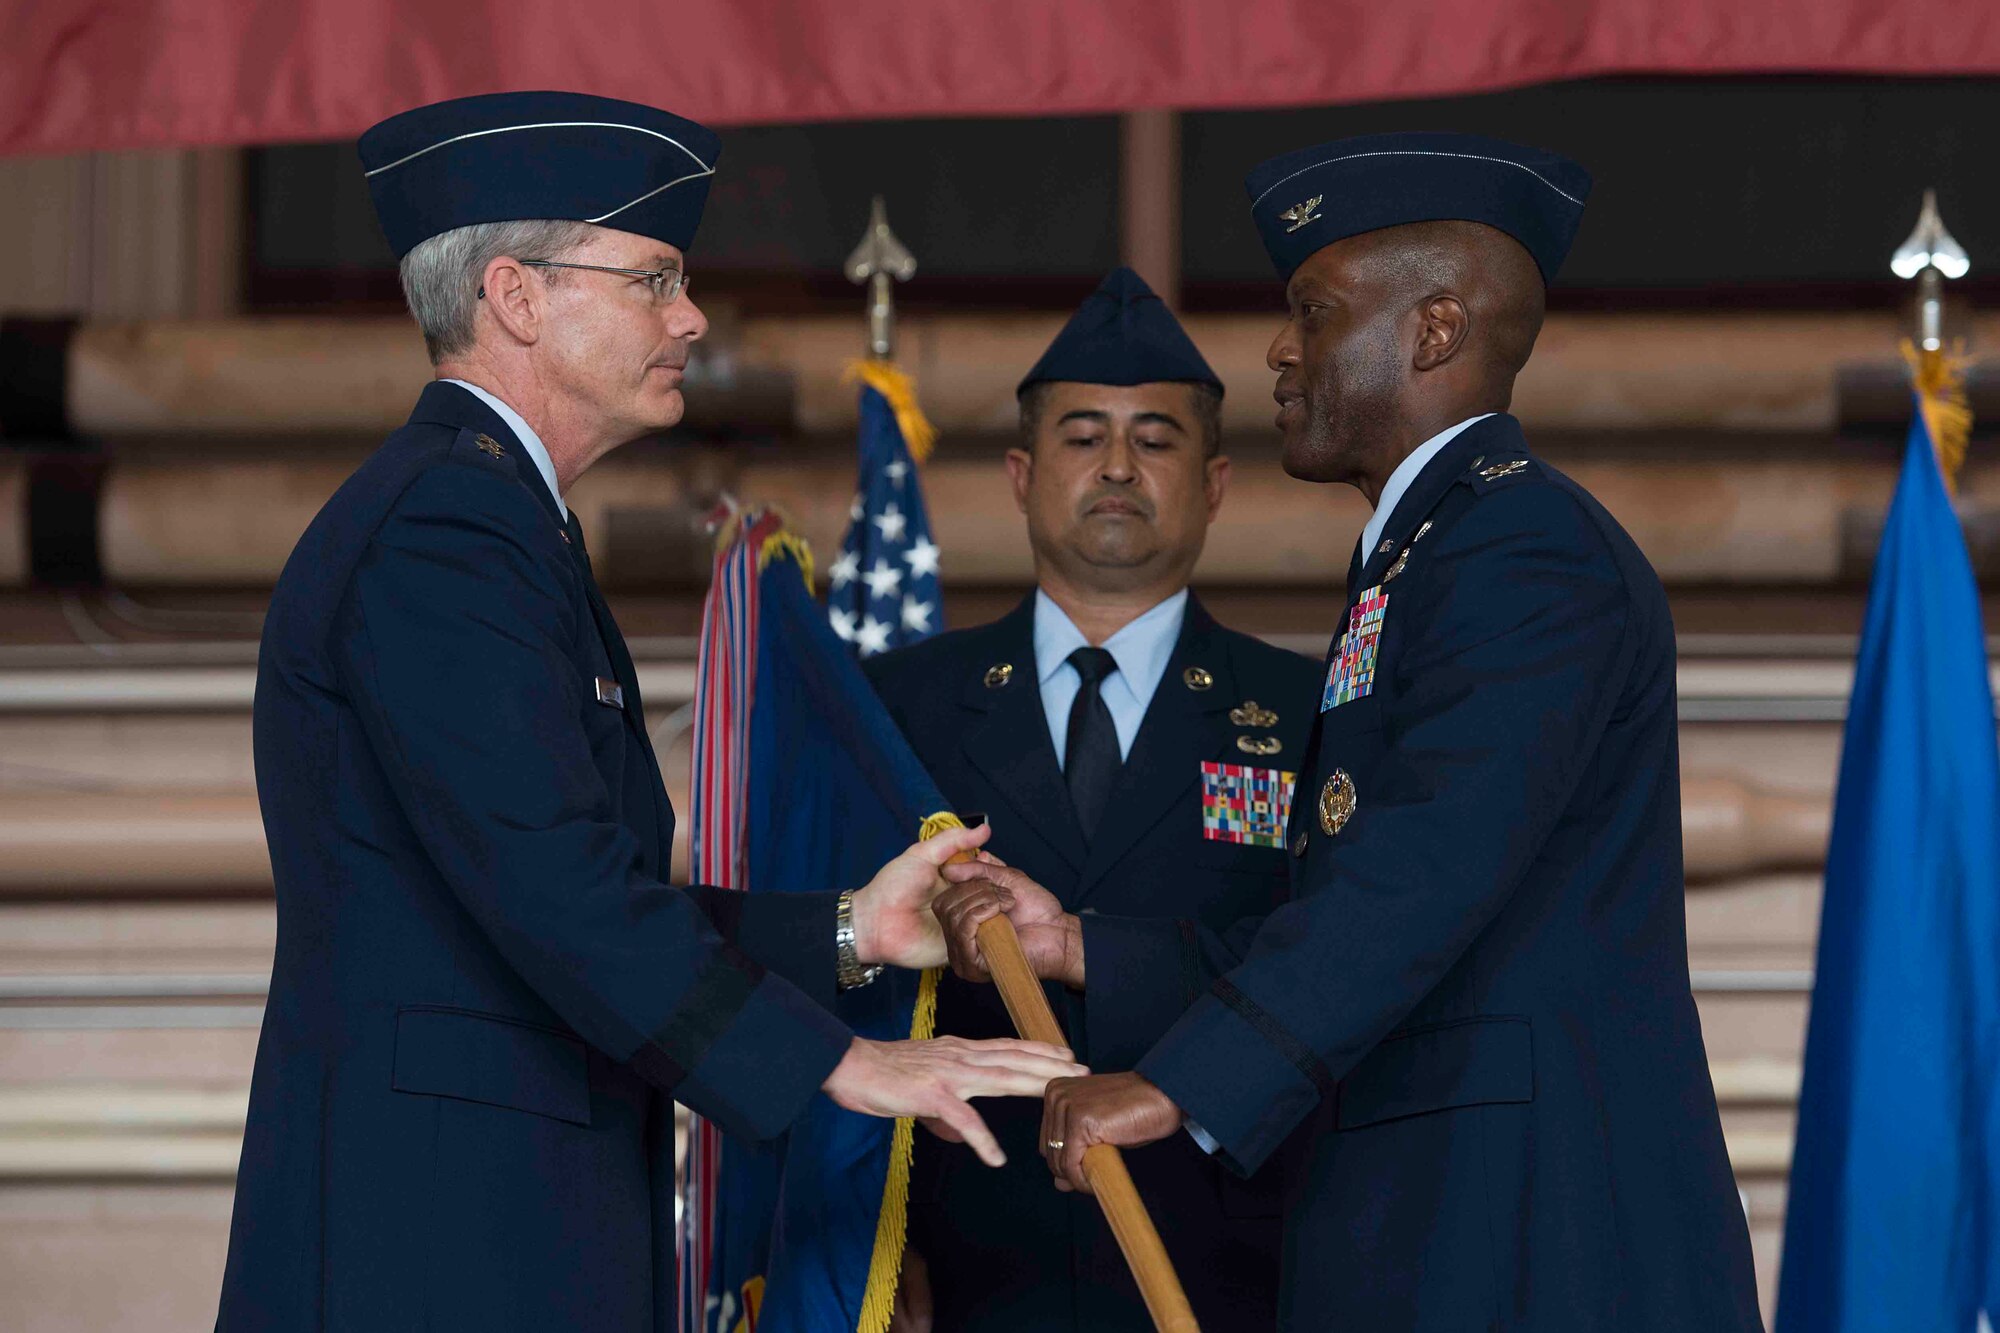 Maj. Gen. Robert Labrutta (left), 2nd Air Force commander, passes the ceremonial guidon to Col. Ronald Jolly (right), incoming 82nd Training Wing commander, during the 82nd Training Wing Change of Command ceremony at Sheppard Air Force Base, Texas, March 21, 2017. Jolly served at the Pentagon before arriving to Sheppard. (U.S. Air Force photo by Staff Sgt. Kyle E. Gese)